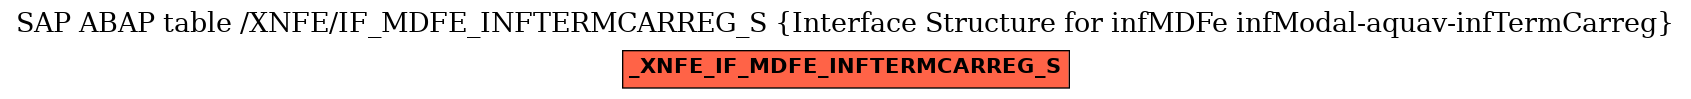 E-R Diagram for table /XNFE/IF_MDFE_INFTERMCARREG_S (Interface Structure for infMDFe infModal-aquav-infTermCarreg)